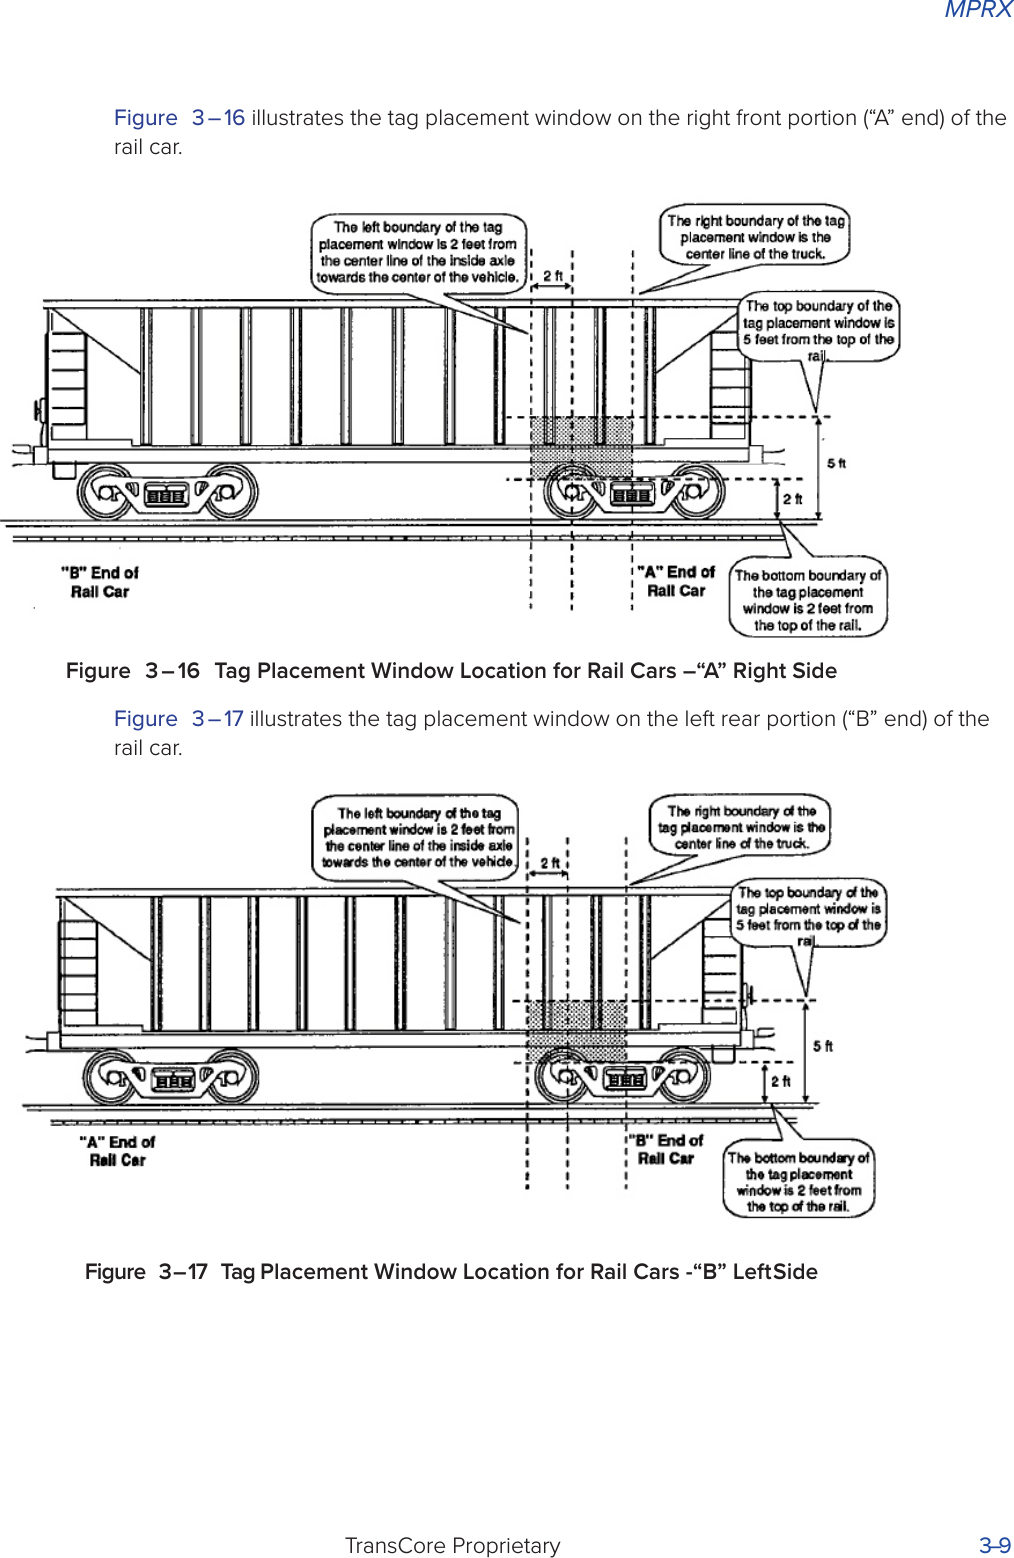 MPRXTransCore Proprietary 3–9Figure 3 – 16 illustrates the tag placement window on the right front portion (“A” end) of the rail car.Figure 3 – 16 Tag Placement Window Location for Rail Cars –“A” Right SideFigure 3 – 17 illustrates the tag placement window on the left rear portion (“B” end) of the rail car.Figure 3 – 17 Tag Placement Window Location for Rail Cars -“B” Left Side